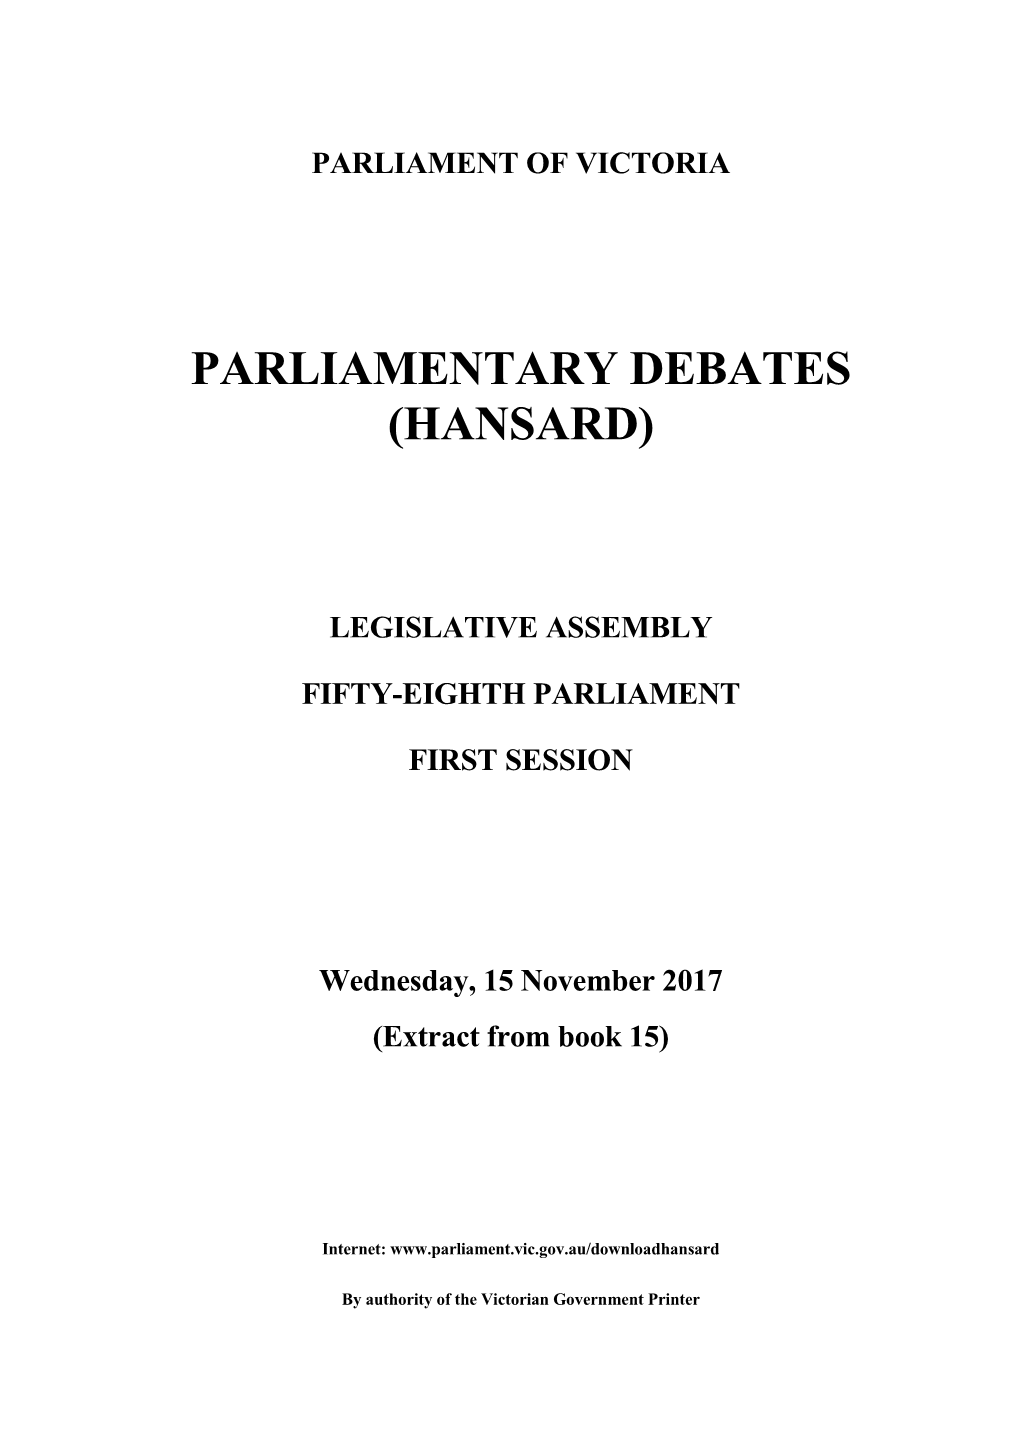 LEGISLATIVE ASSEMBLY FIFTY-EIGHTH PARLIAMENT FIRST SESSION Wednesday, 15 November 2017